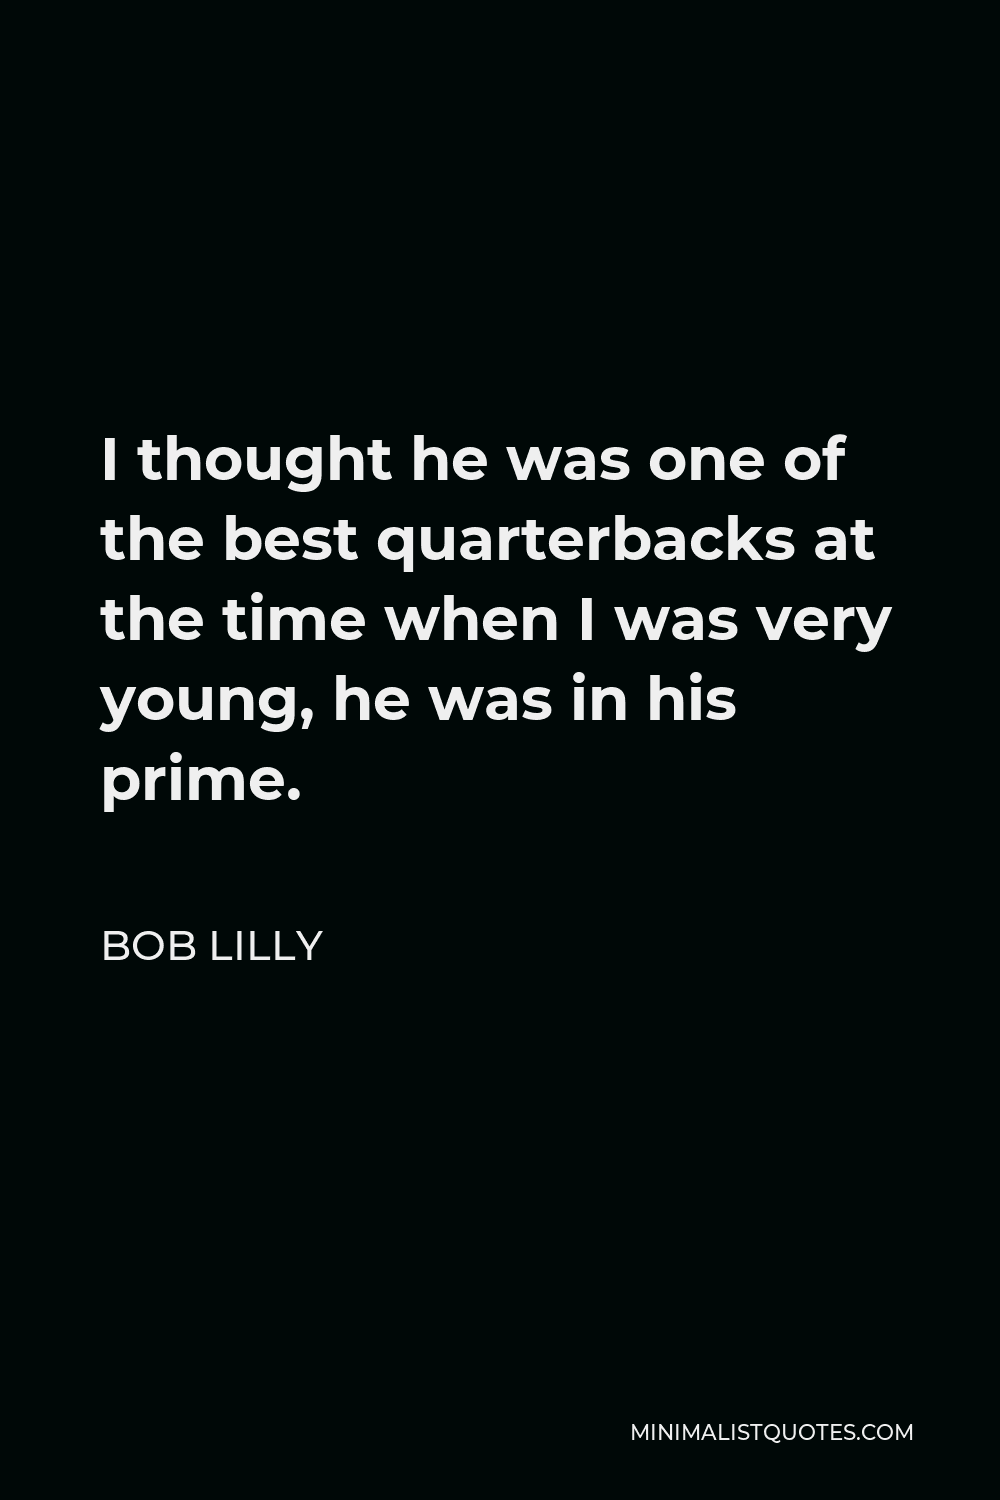 Bob Lilly Quote - I thought he was one of the best quarterbacks at the time when I was very young, he was in his prime.